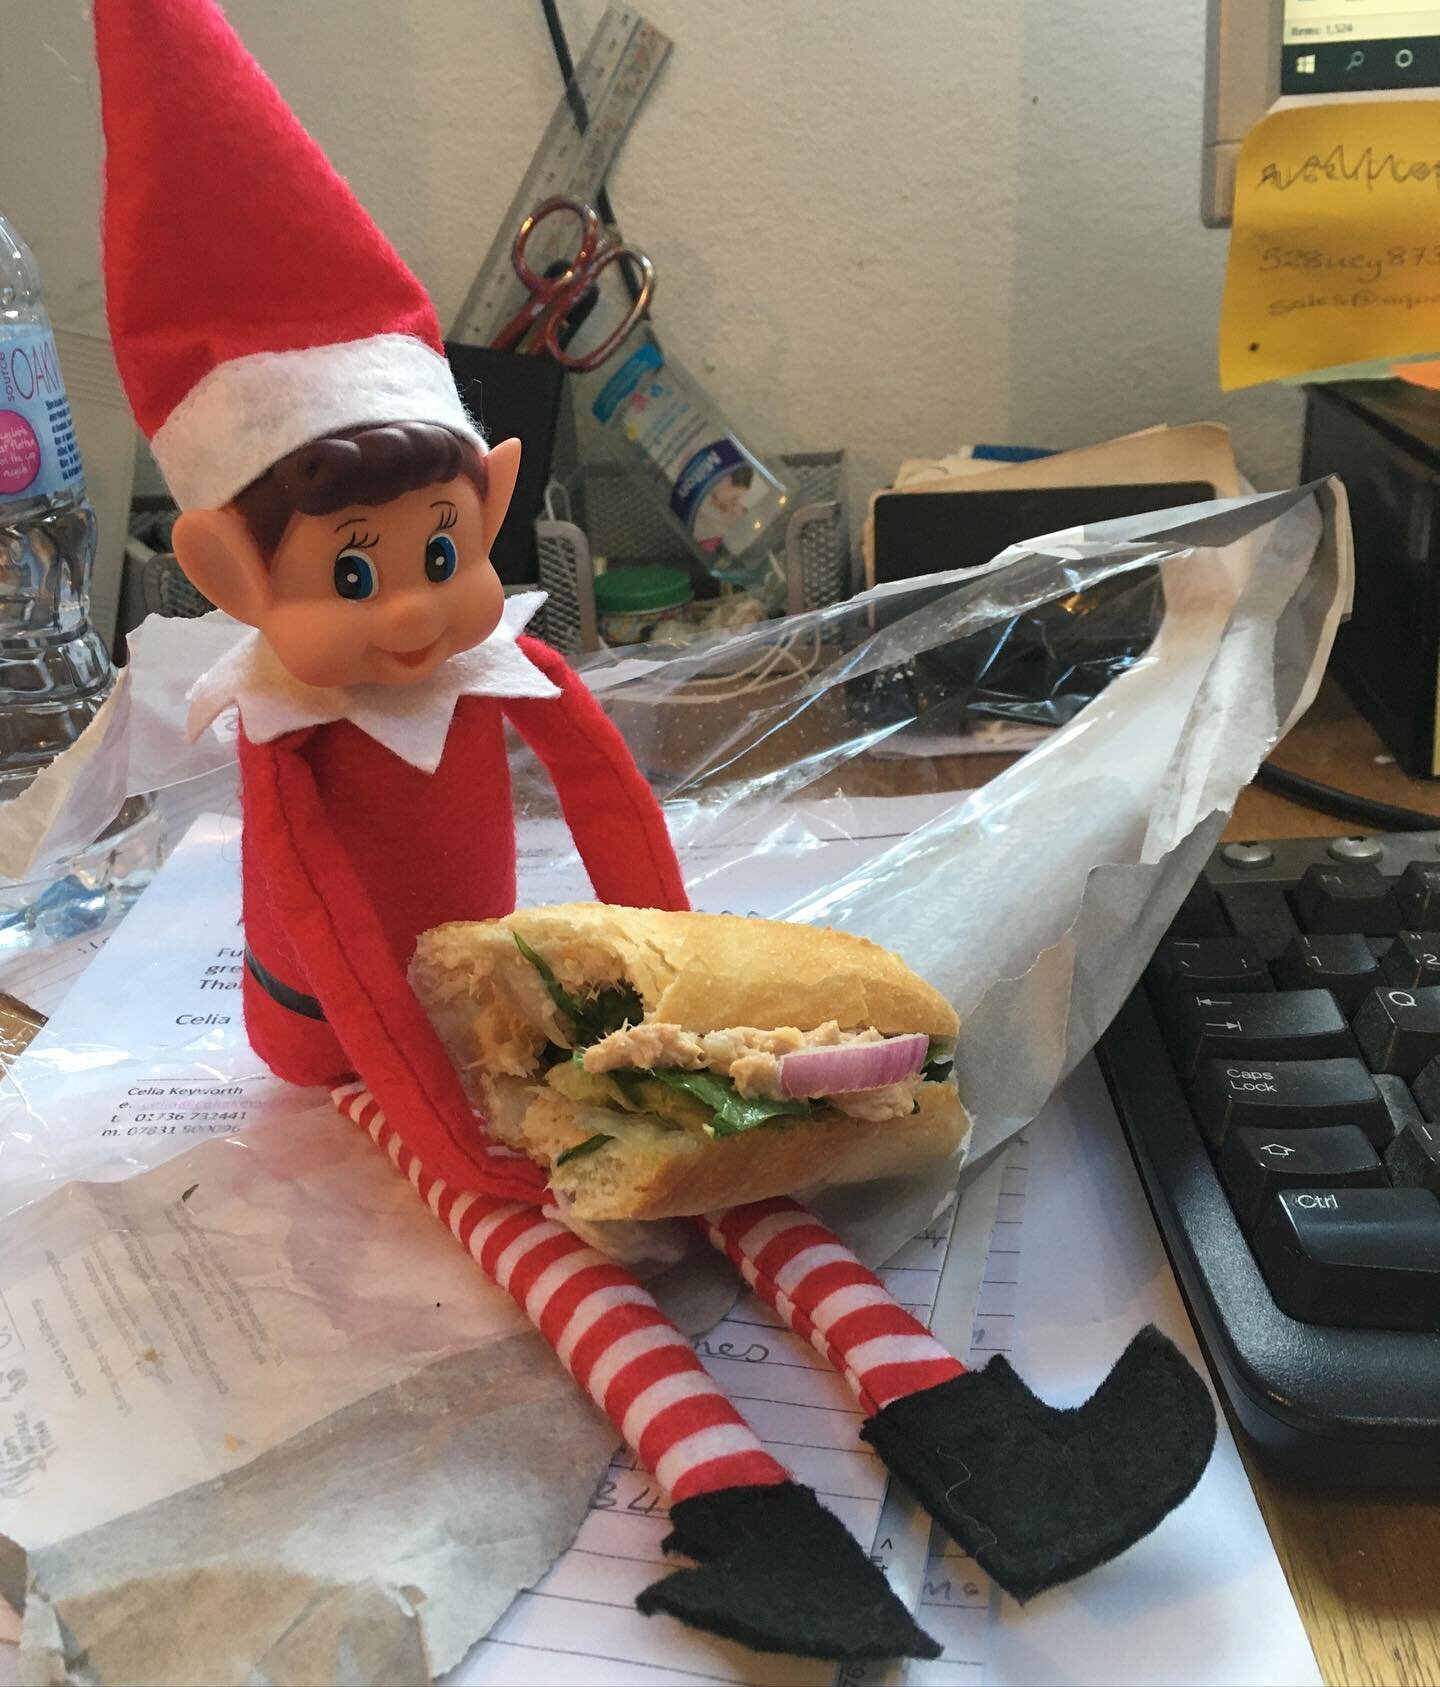 I caught the naughty office elf eating my lunch at work yesterday, dread to think what he is getting up to in there today! 🤶🏻🌲
#christmasdecor #naughtyelf #interiordesign